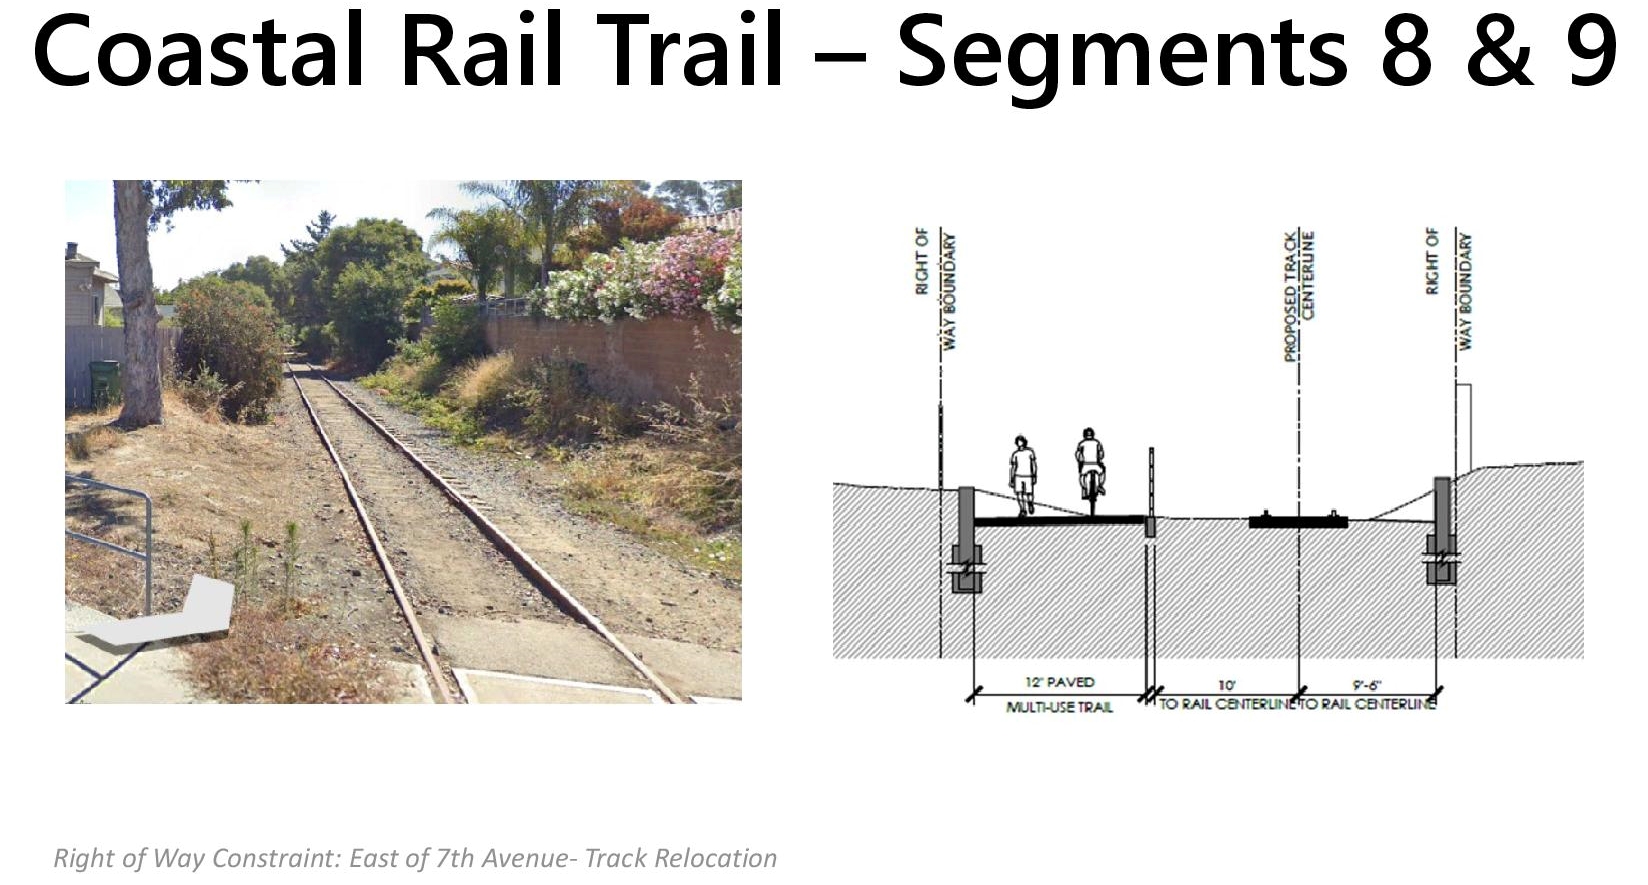 Train tracks could be removed east of Seventh Avenue to build a paved path, transportation planners said. (Santa Cruz Regional Transportation Commission)